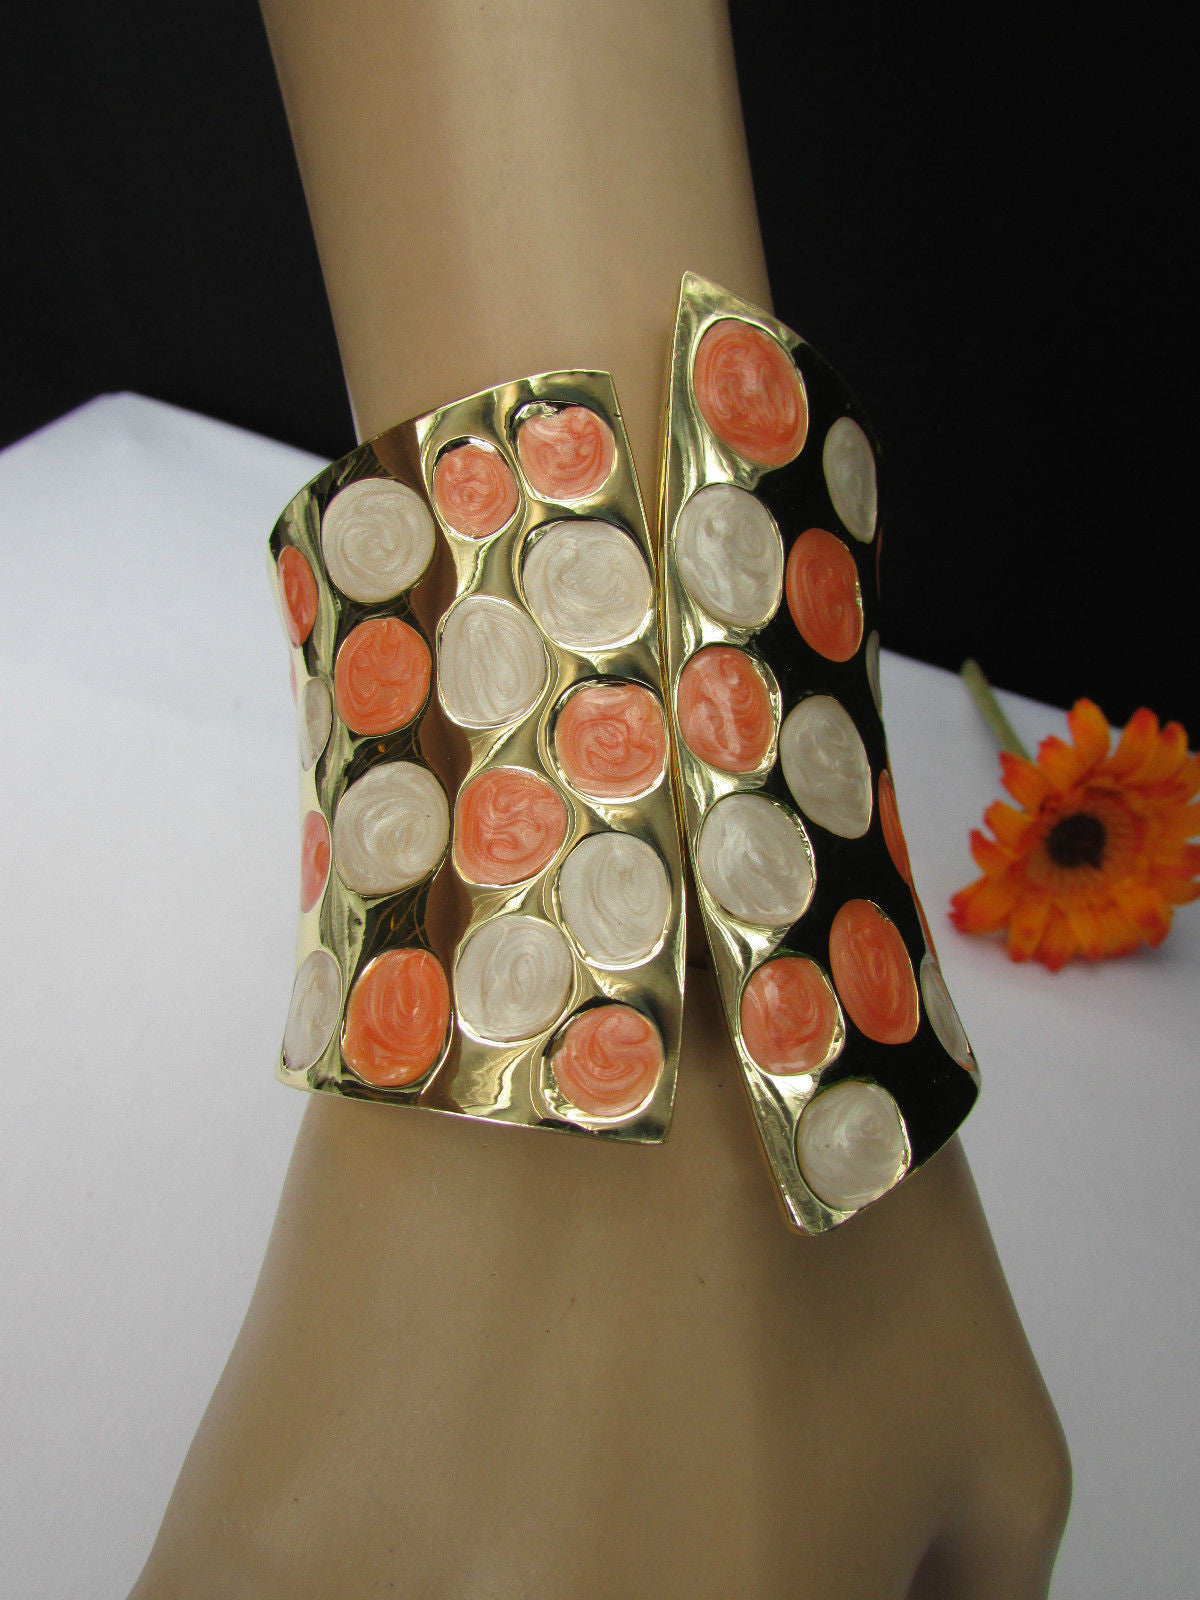 Gold Metal Wide Cuff Bracelet Claws White Peach Polka Dots Women Fashion Jewelry Accessories - alwaystyle4you - 1